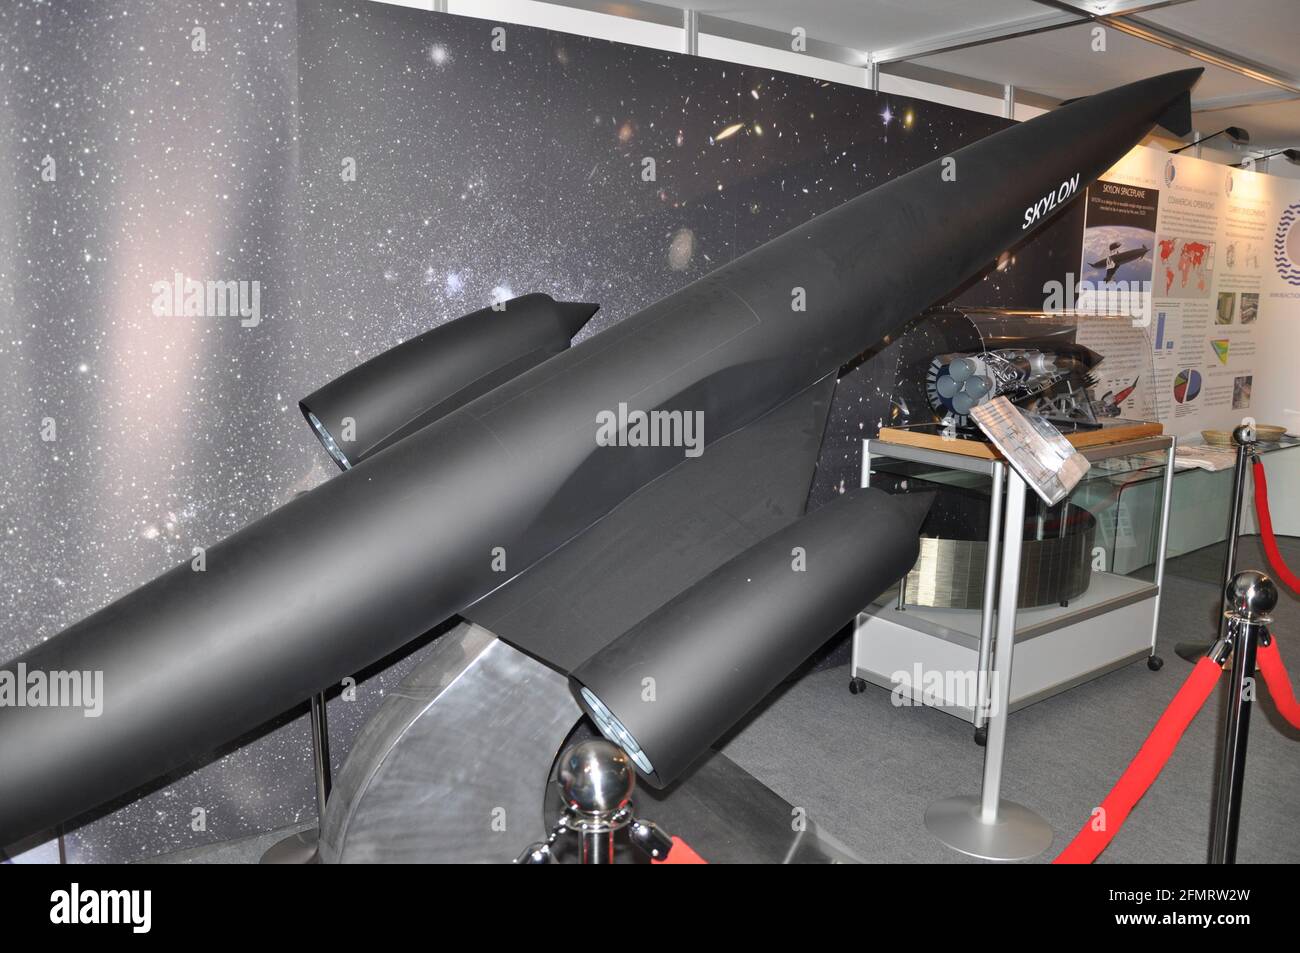 Reaction Engines Limited Skylon spaceplane concept model on display at Farnborough International Airshow 2010, UK. Exhibition hall trade stand Stock Photo